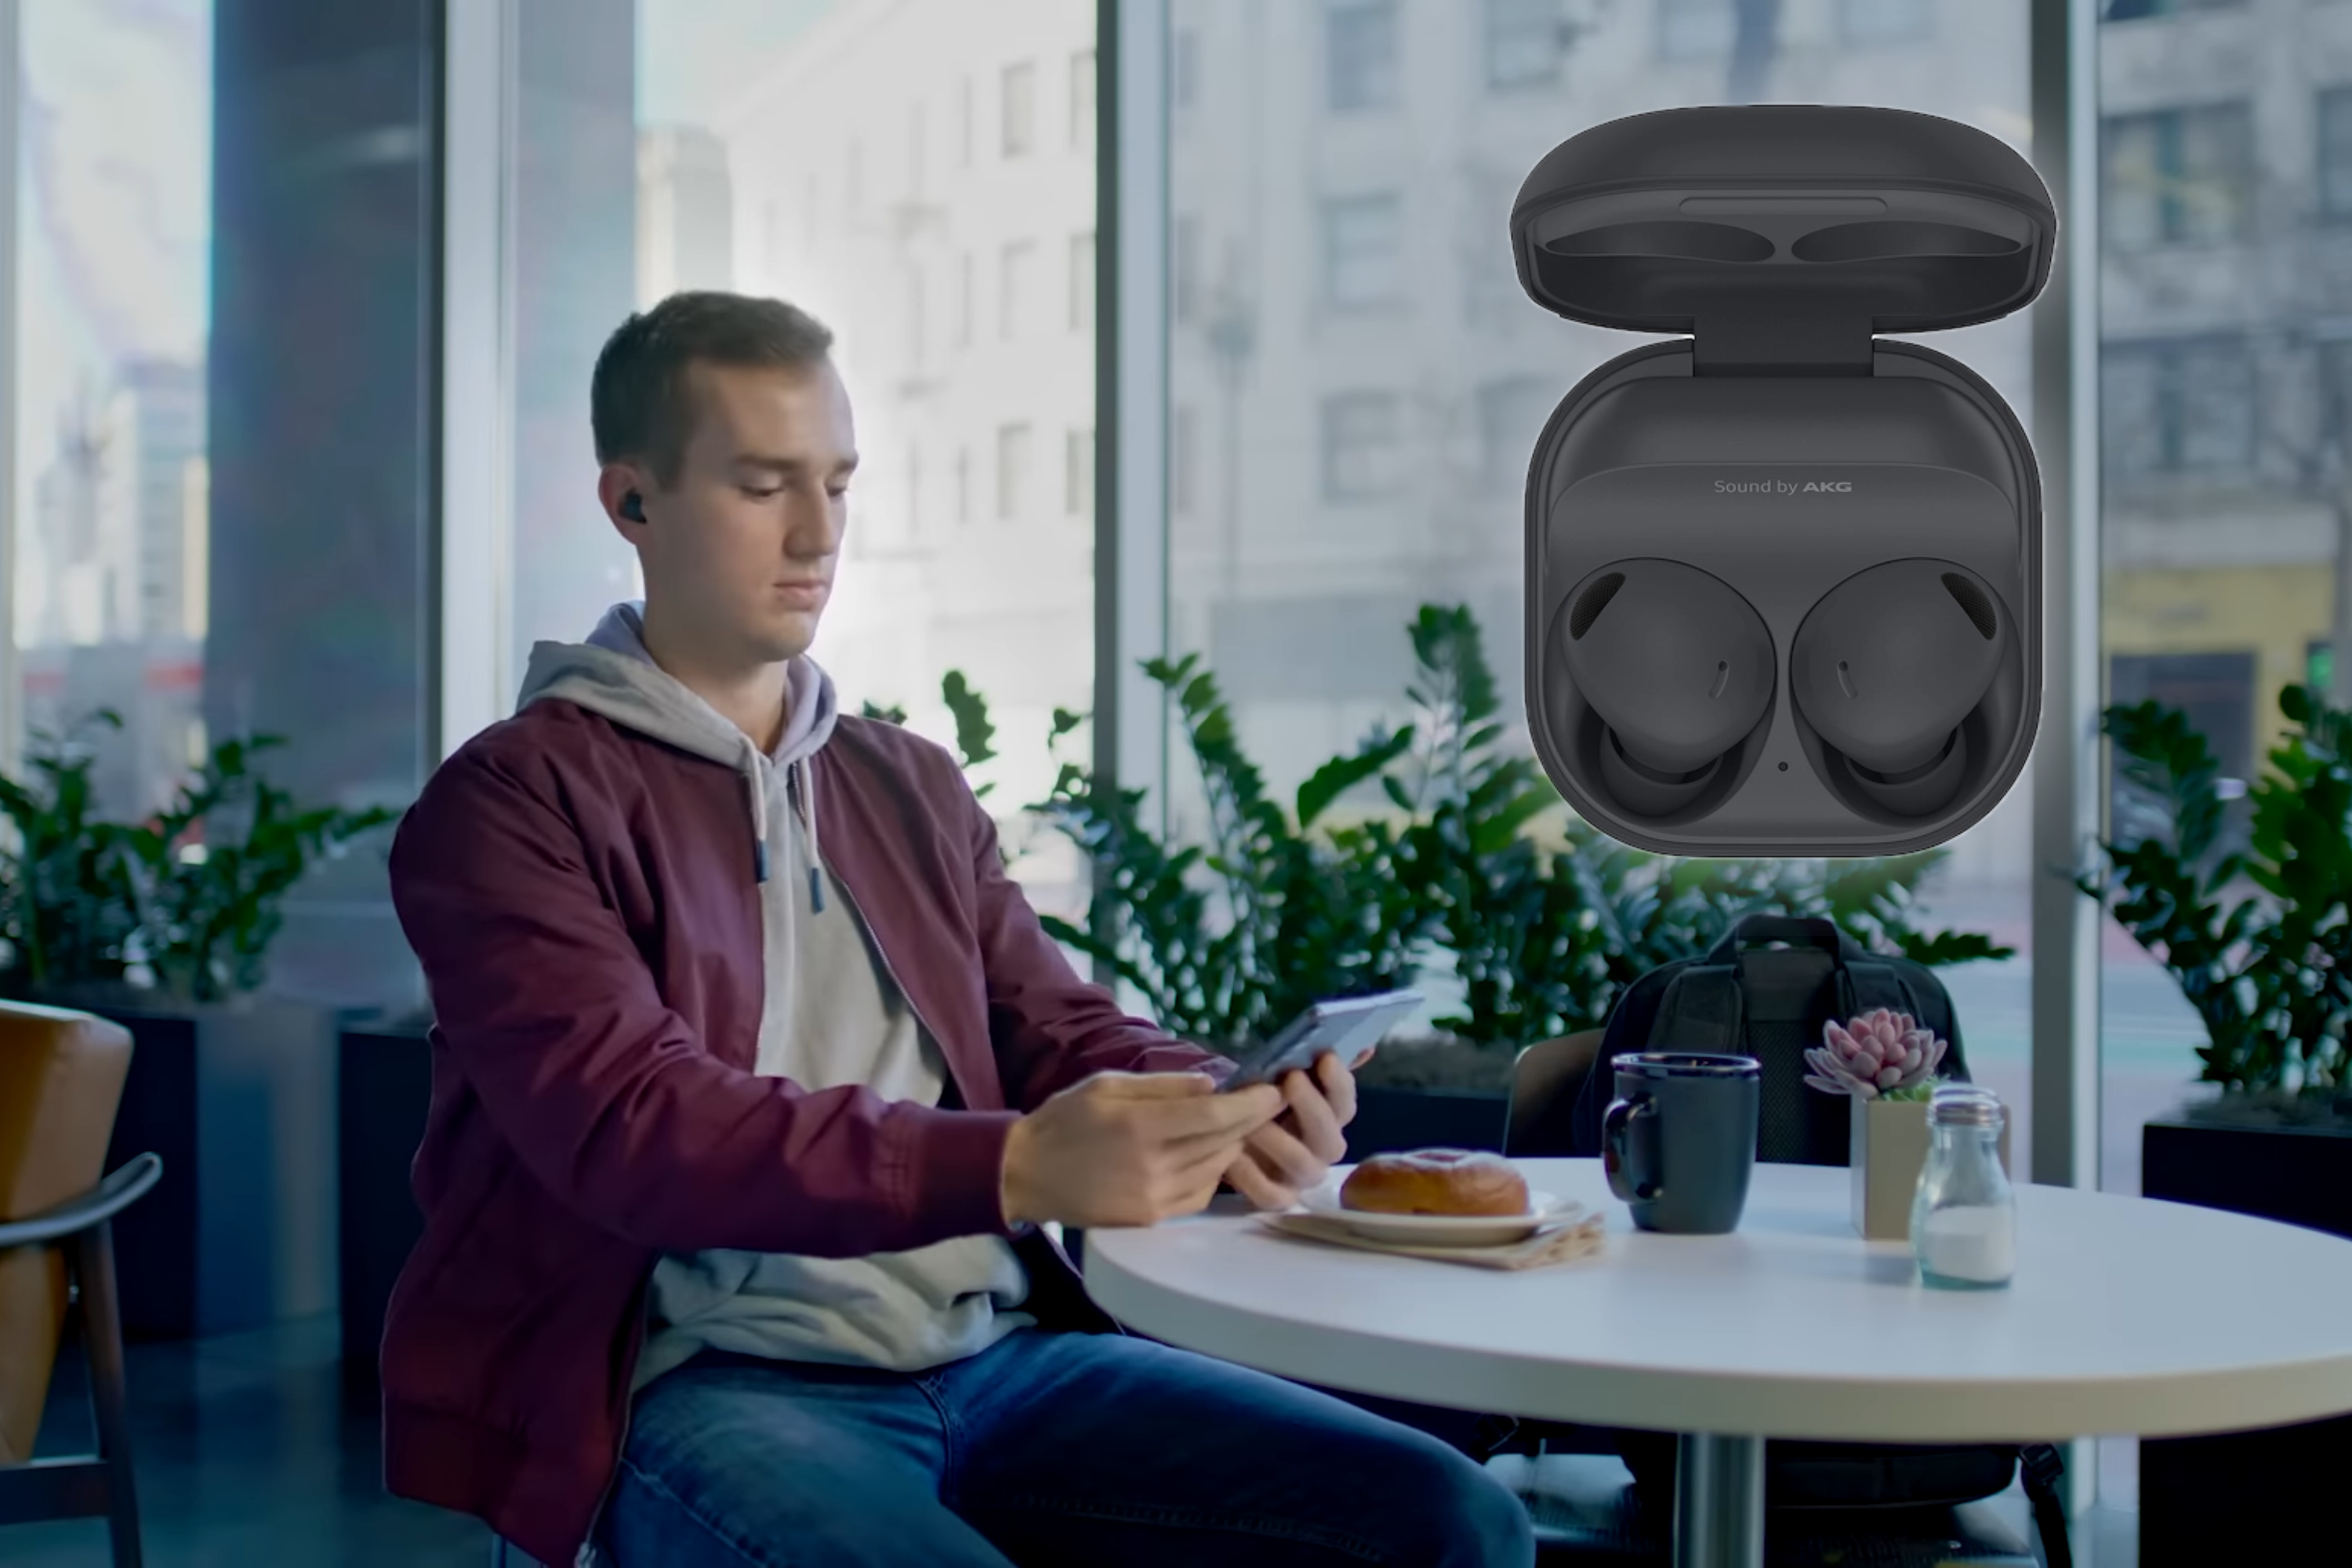 Samsung Galaxy Buds 2 Pro being used by person ith smartphone